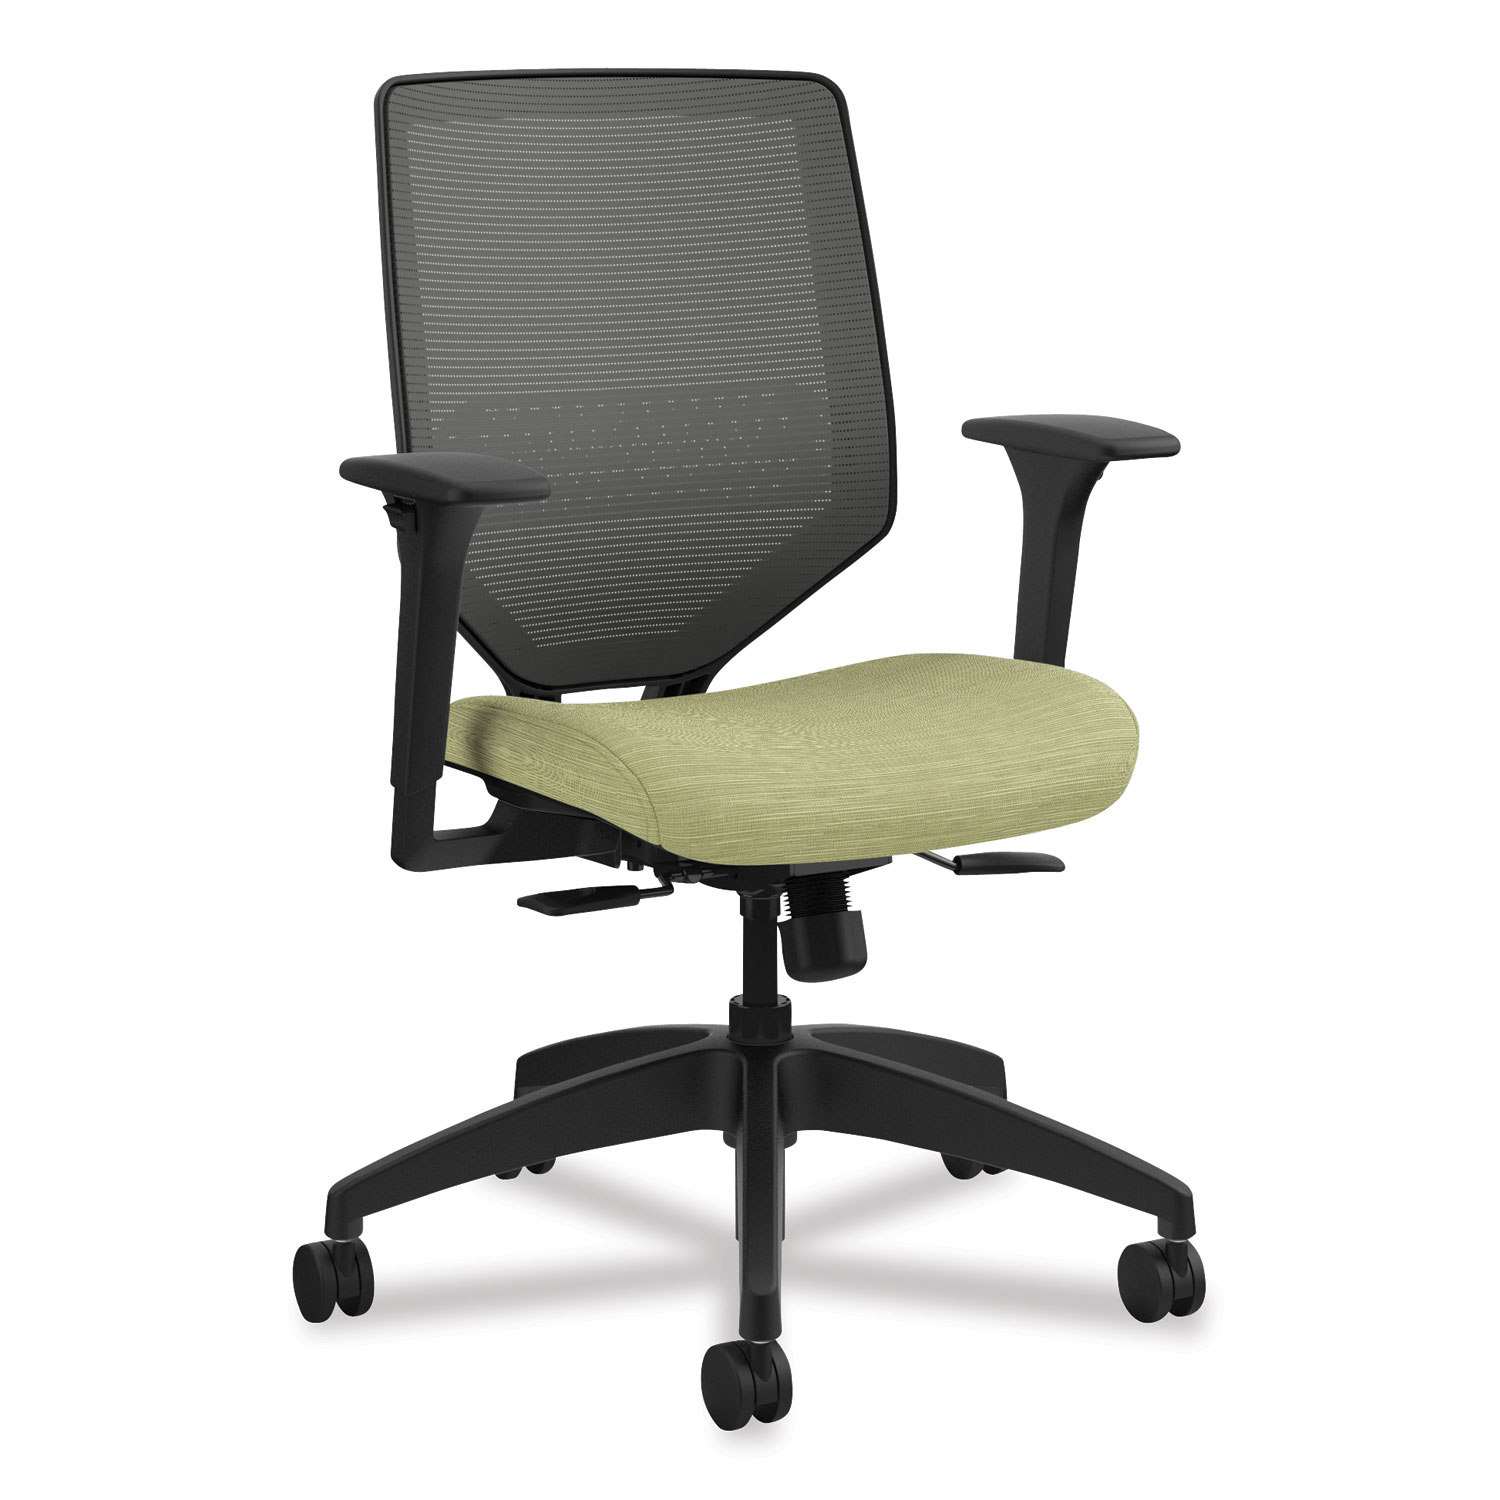  HON HONSVM1ALICC82T Solve Series Mesh Back Task Chair, Supports up to 300 lbs., Meadow Seat, Charcoal Back, Black Base (HONSVM1ALICC82T) 